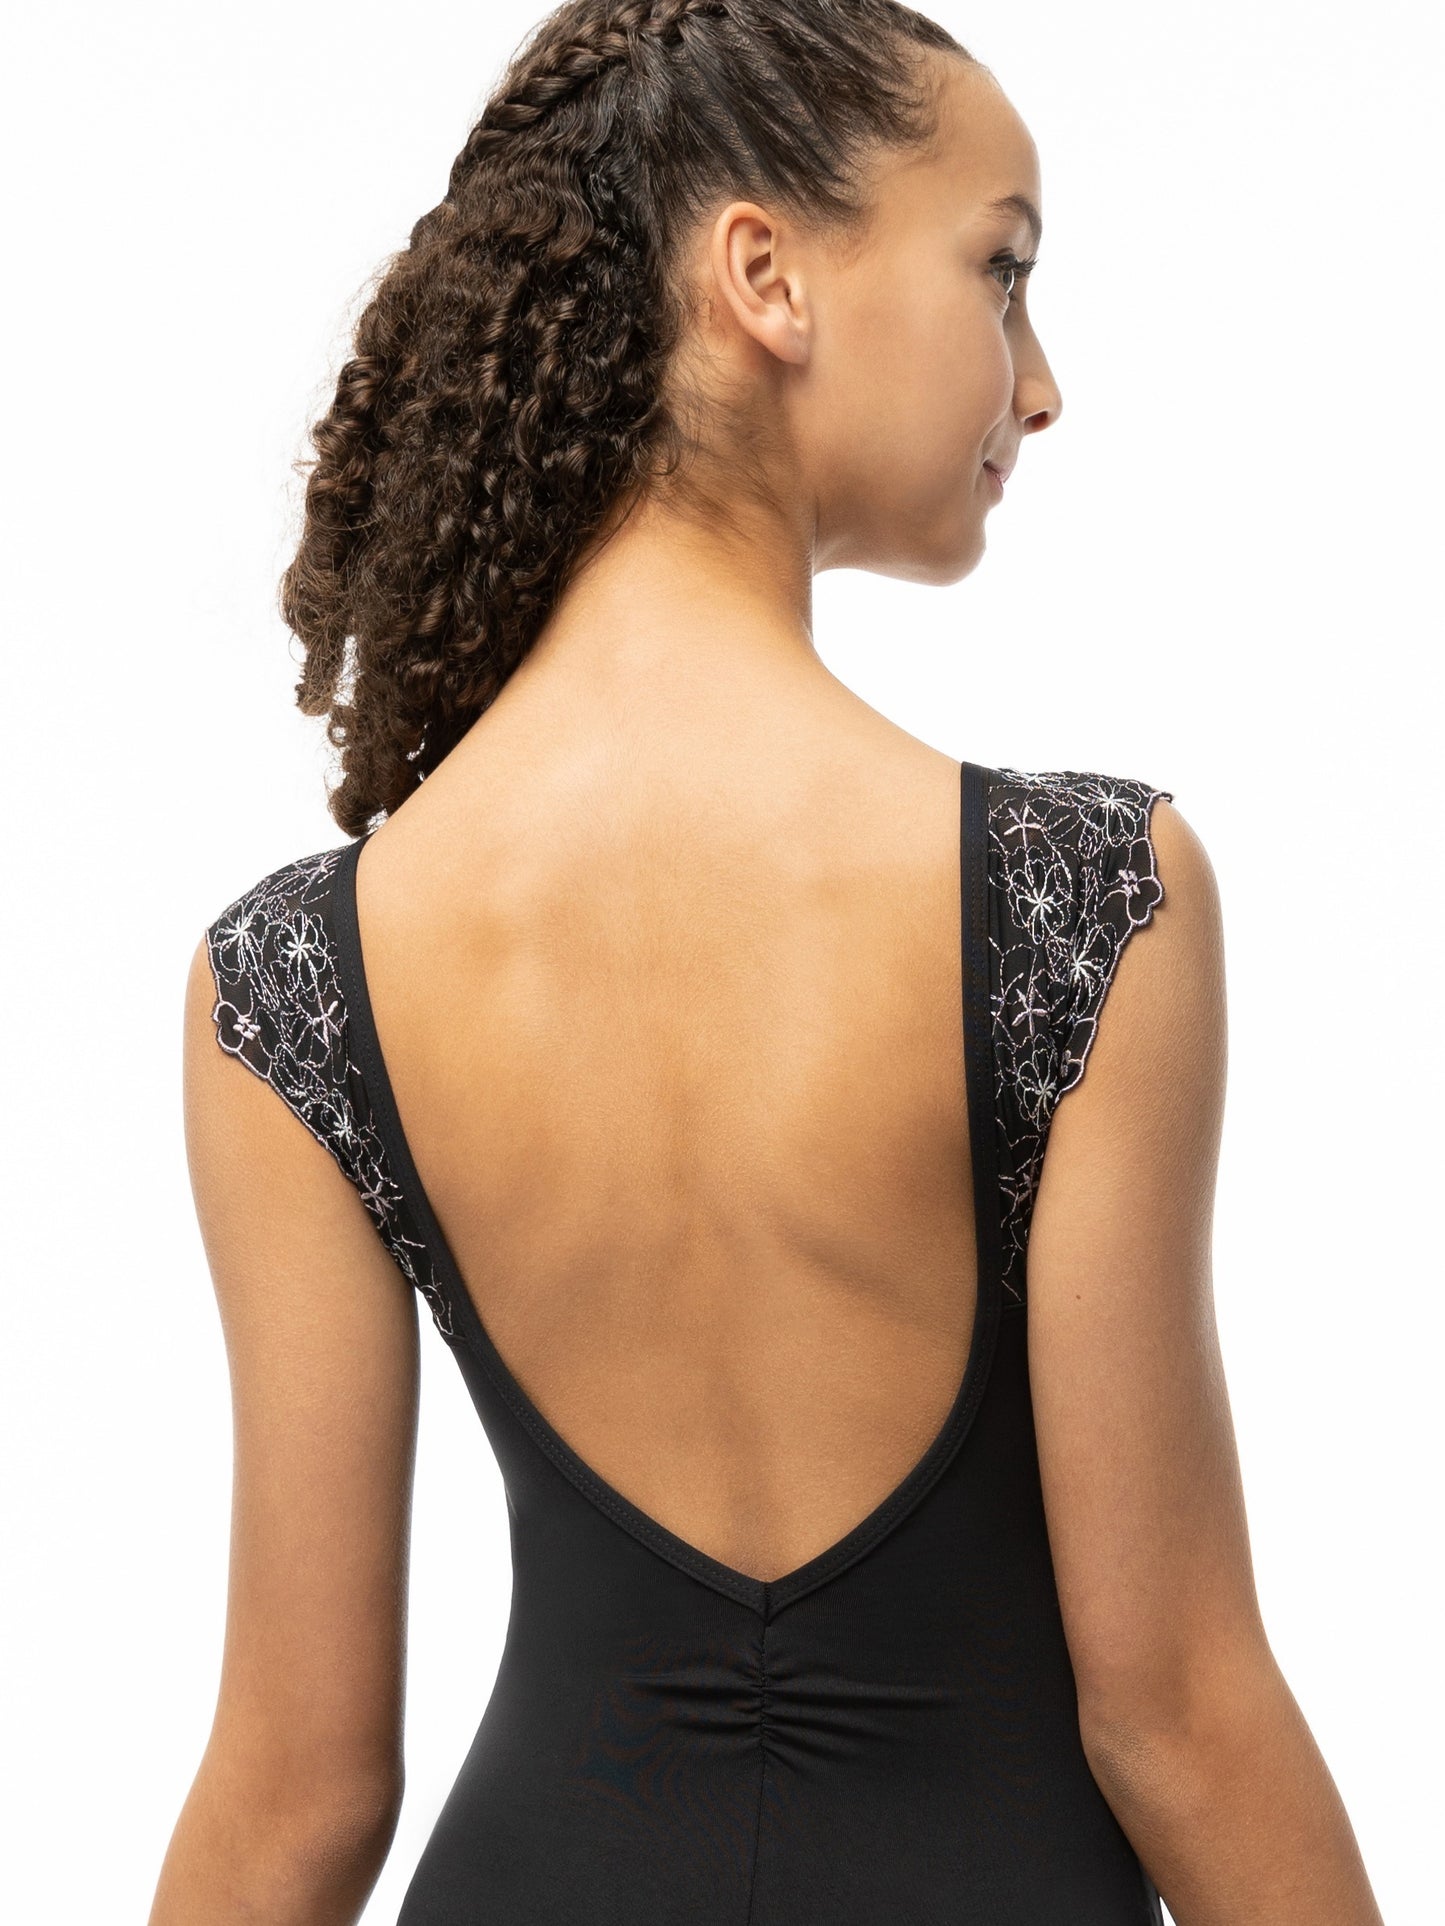 Danznmotion 2403A - Darby Black Infinity Lace Back Bodysuit - Adult Sizes -  Edee's Place